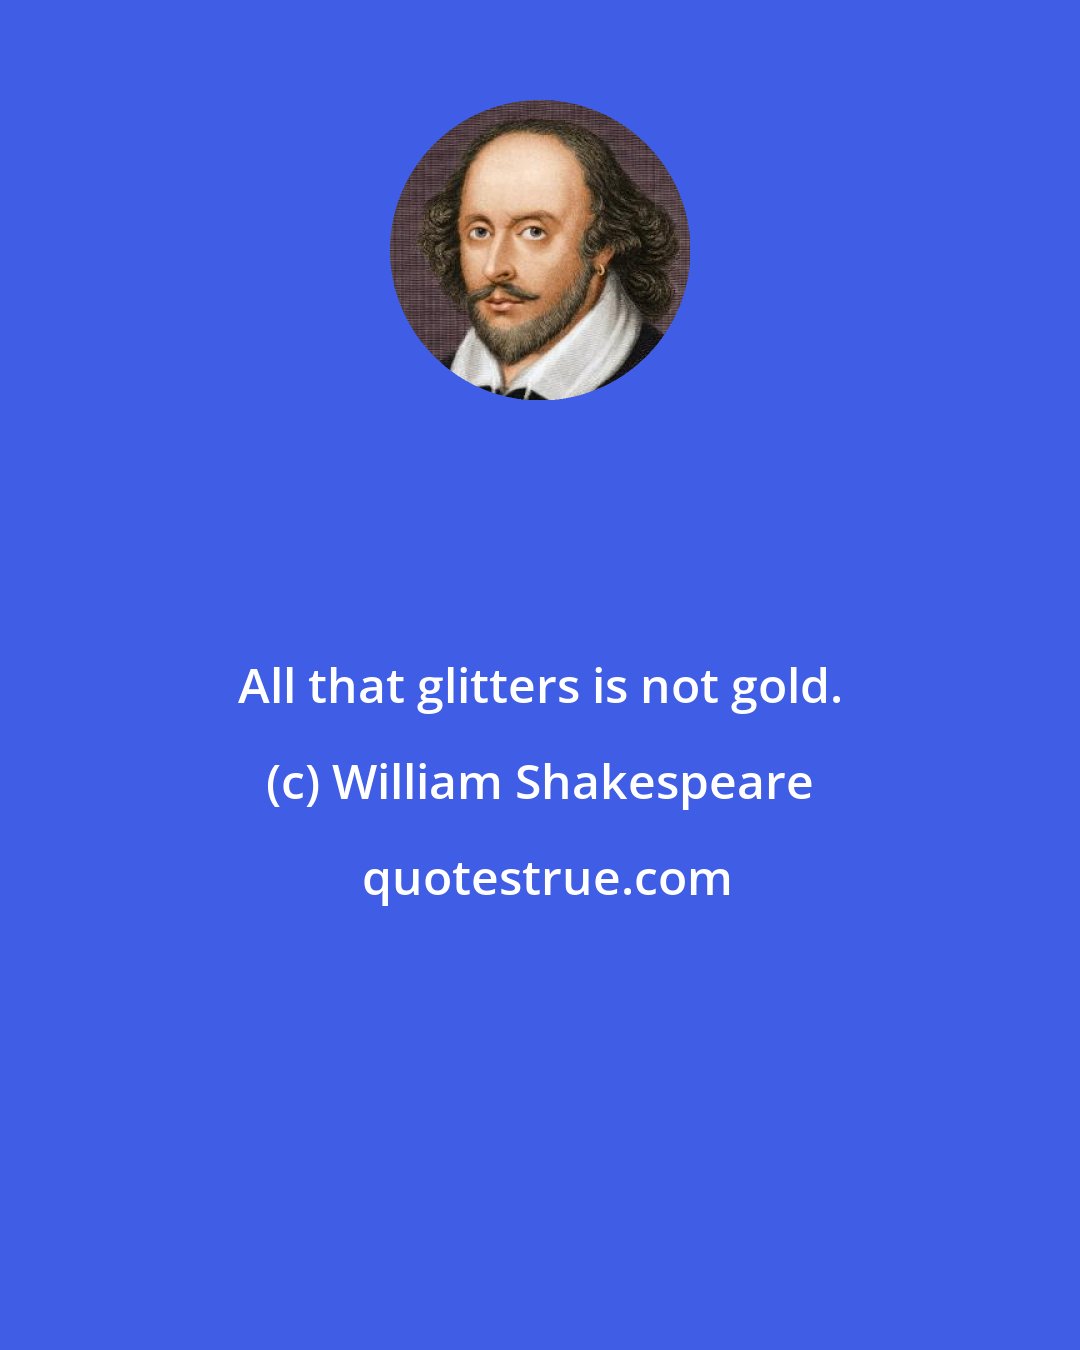 William Shakespeare: All that glitters is not gold.